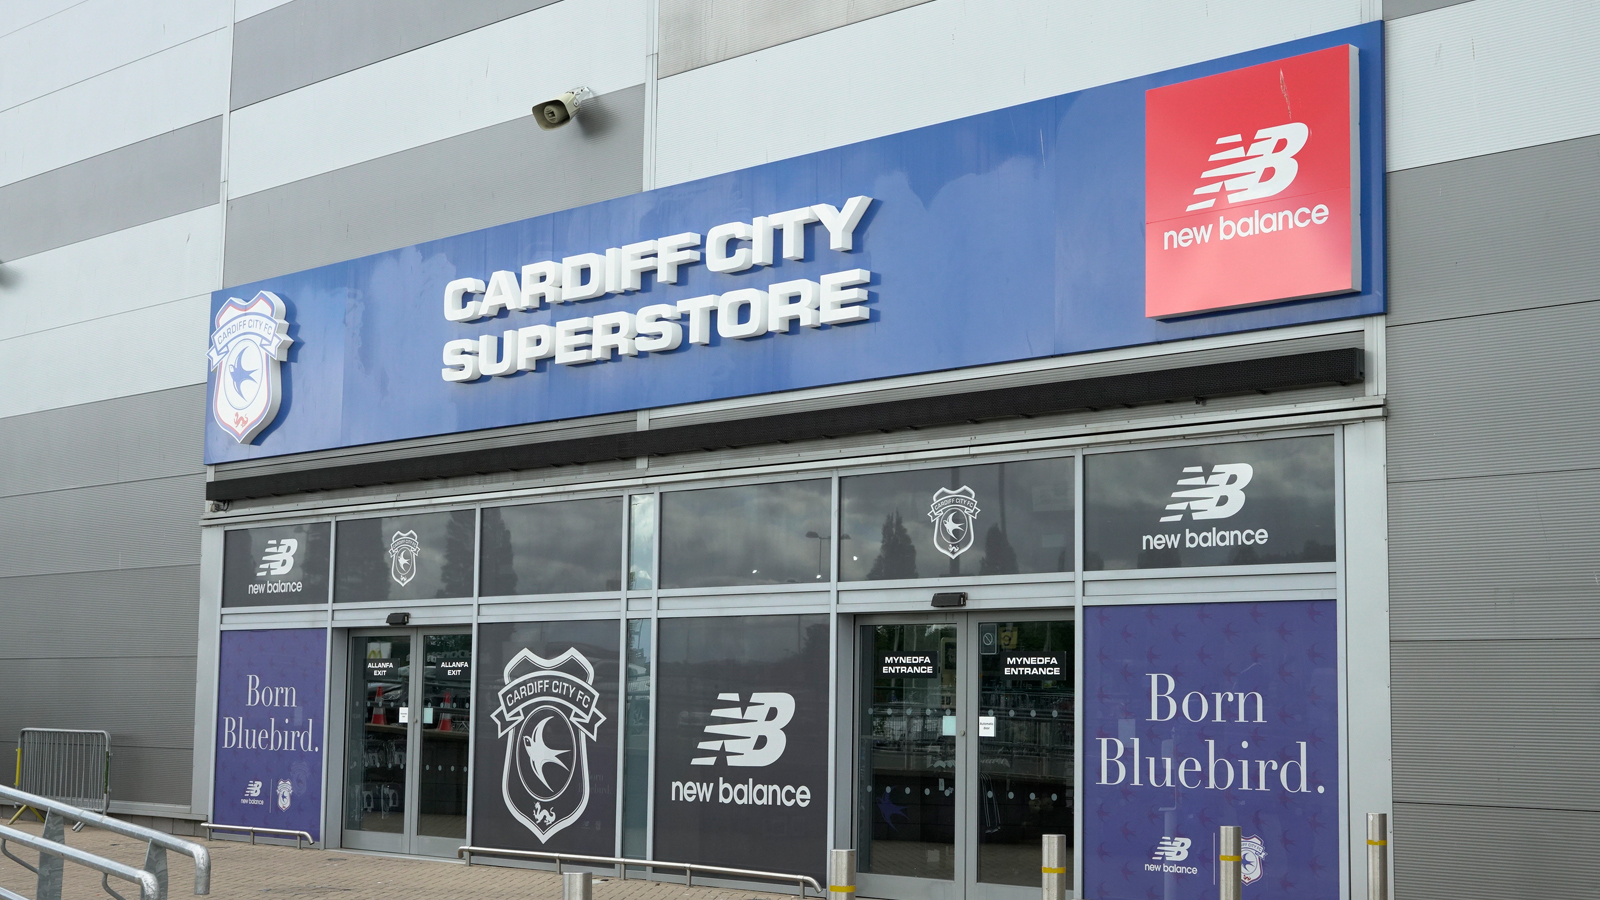 Cardiff City FC SuperStore